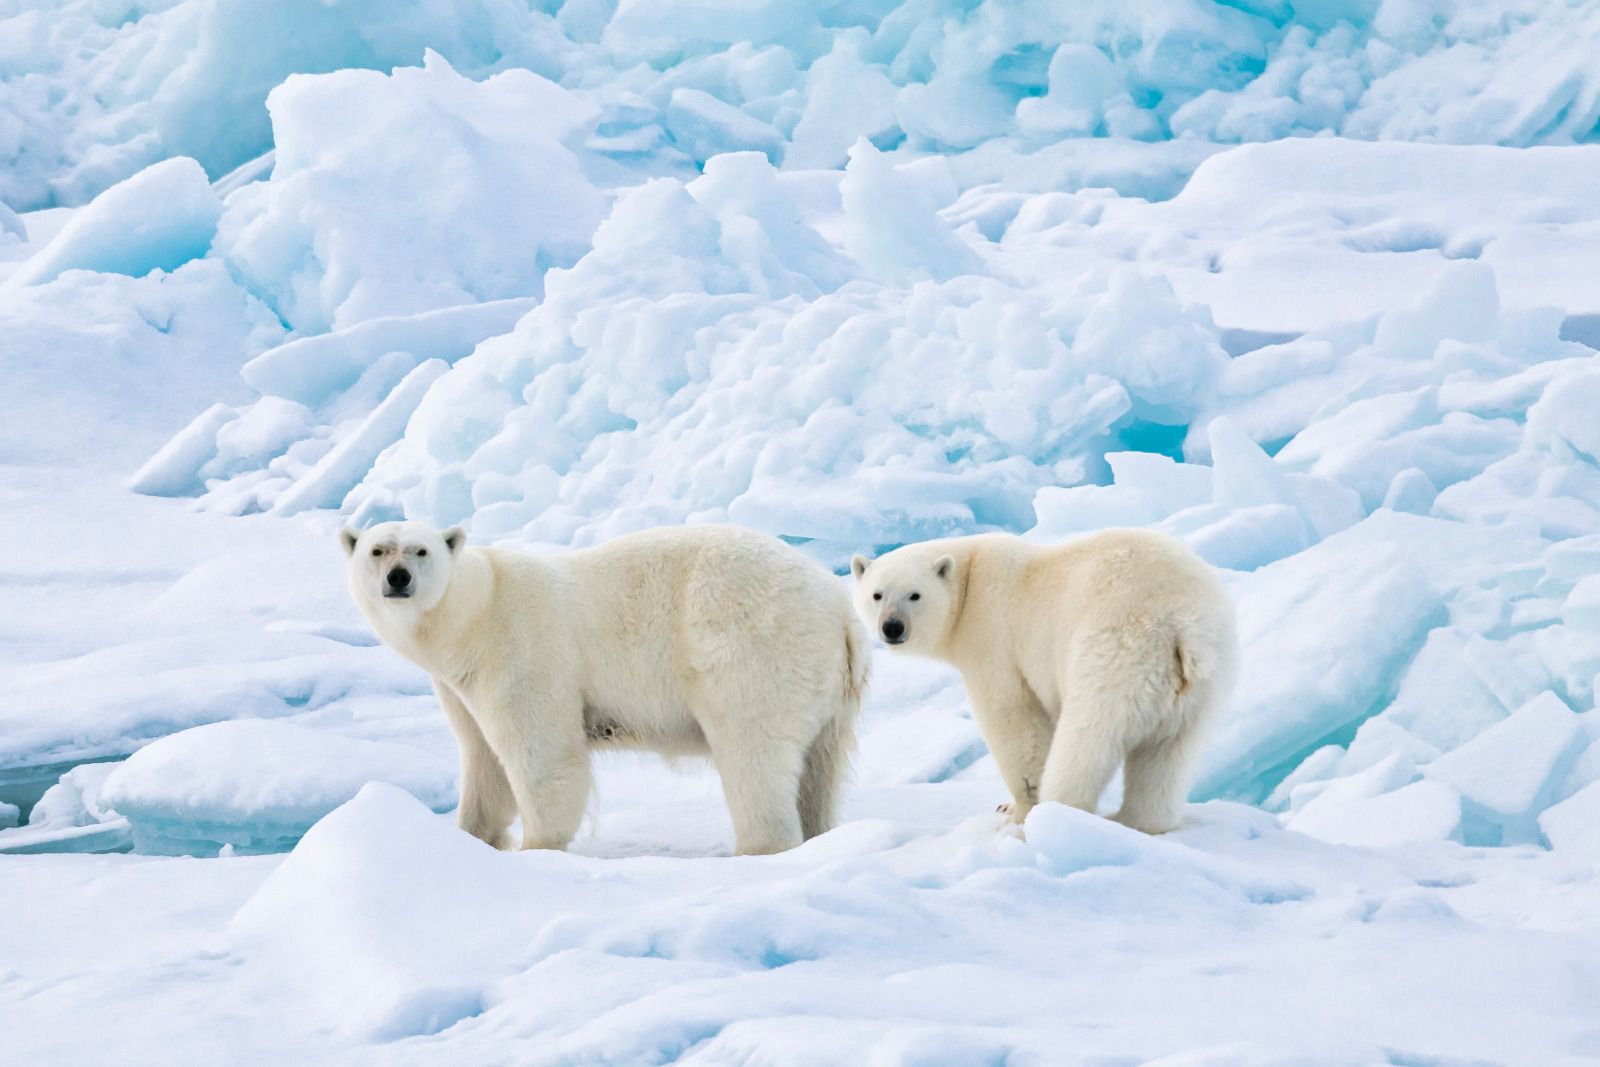 Polar bears spotted from Ponant's Le Commandant Charcot in the Arctic